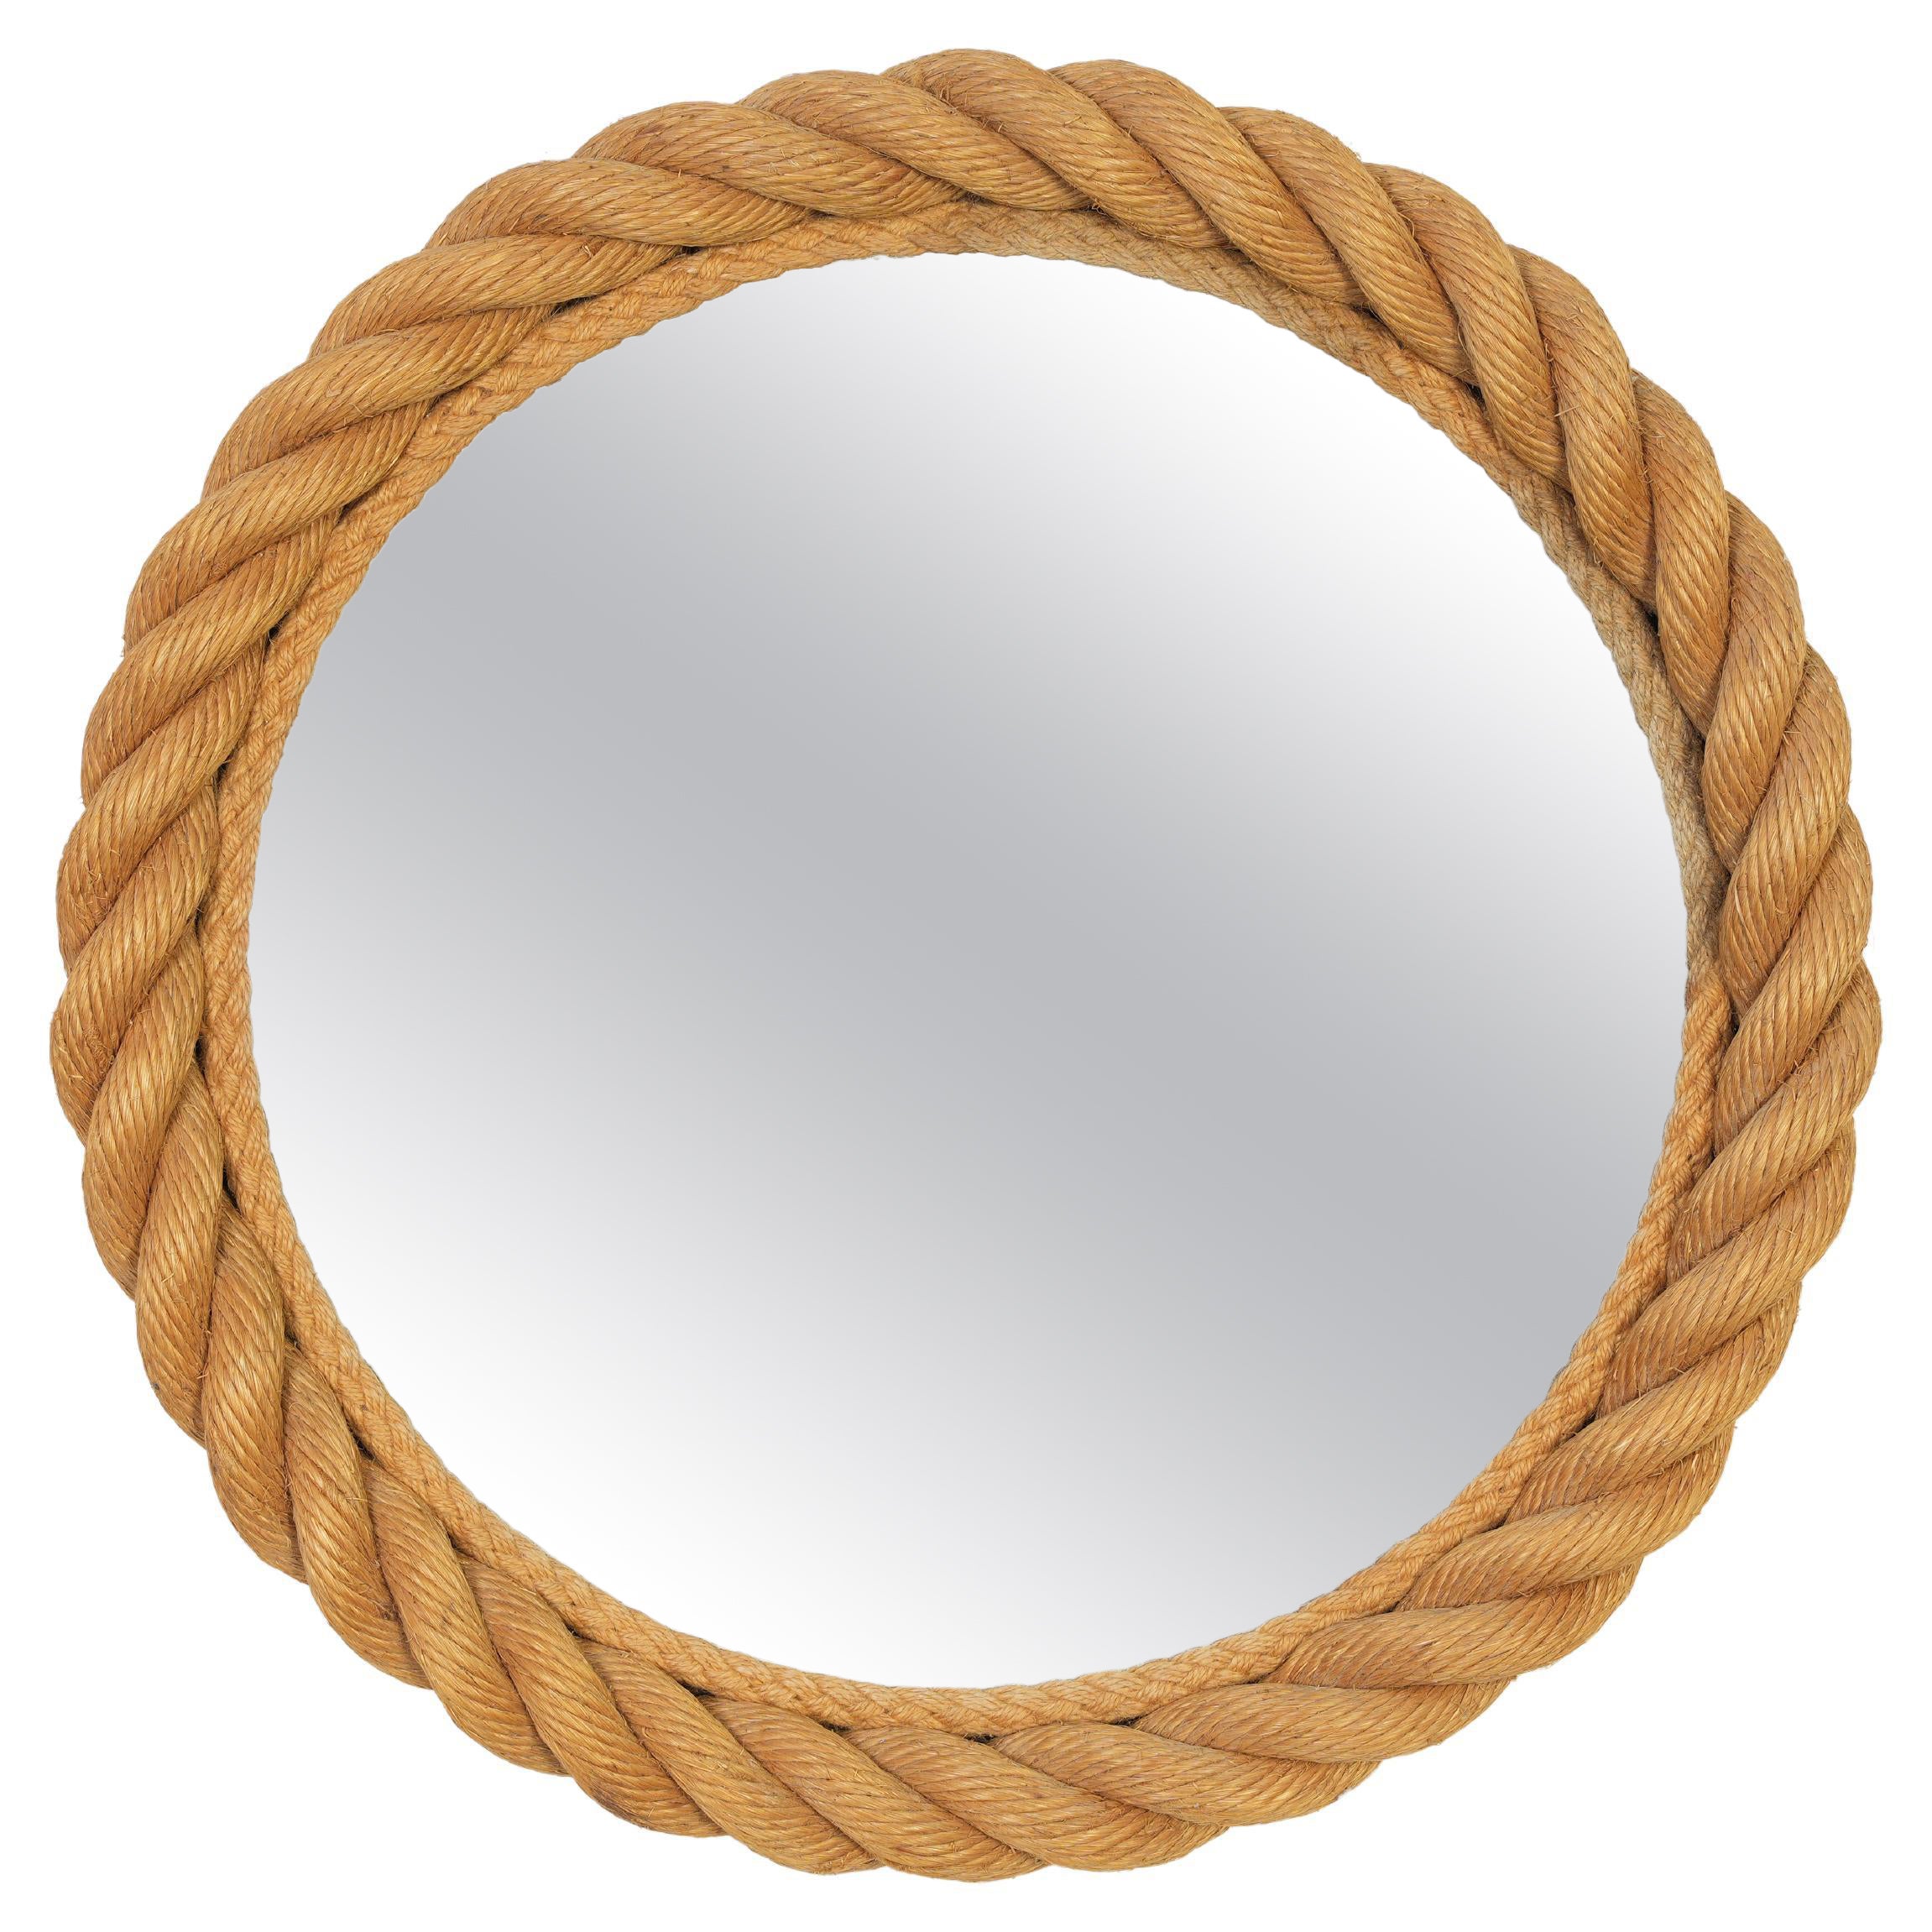 Beautiful Audoux-Minet Rope Mid-Century French Circular Mirror